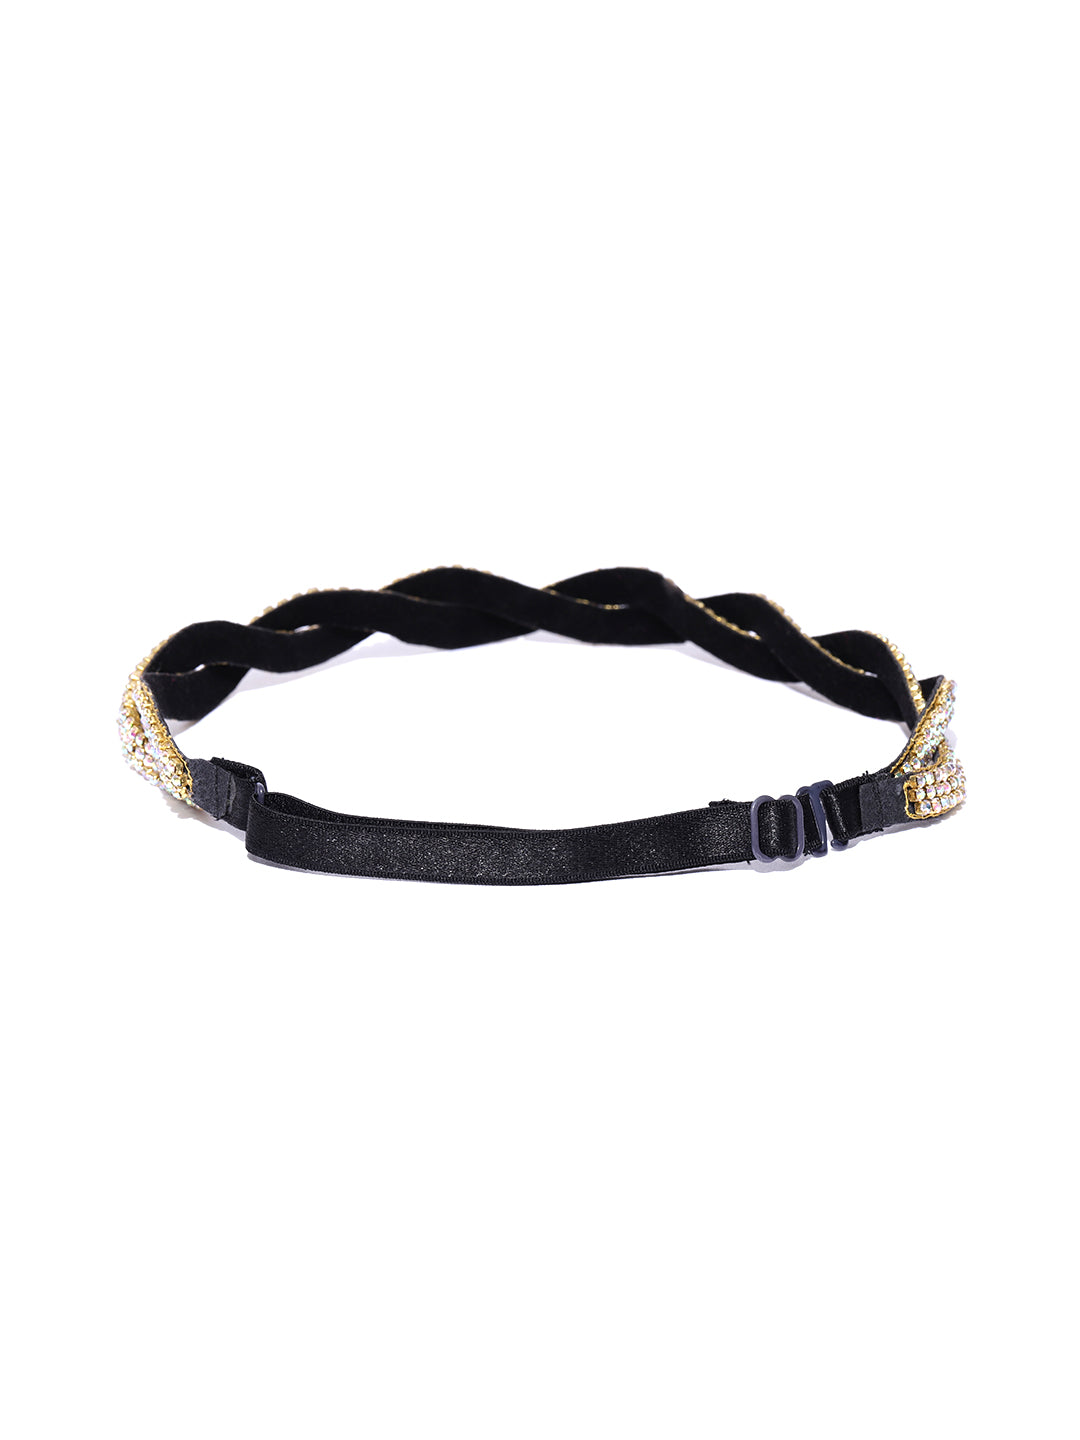 Blueberry multi color stone detailing hair band